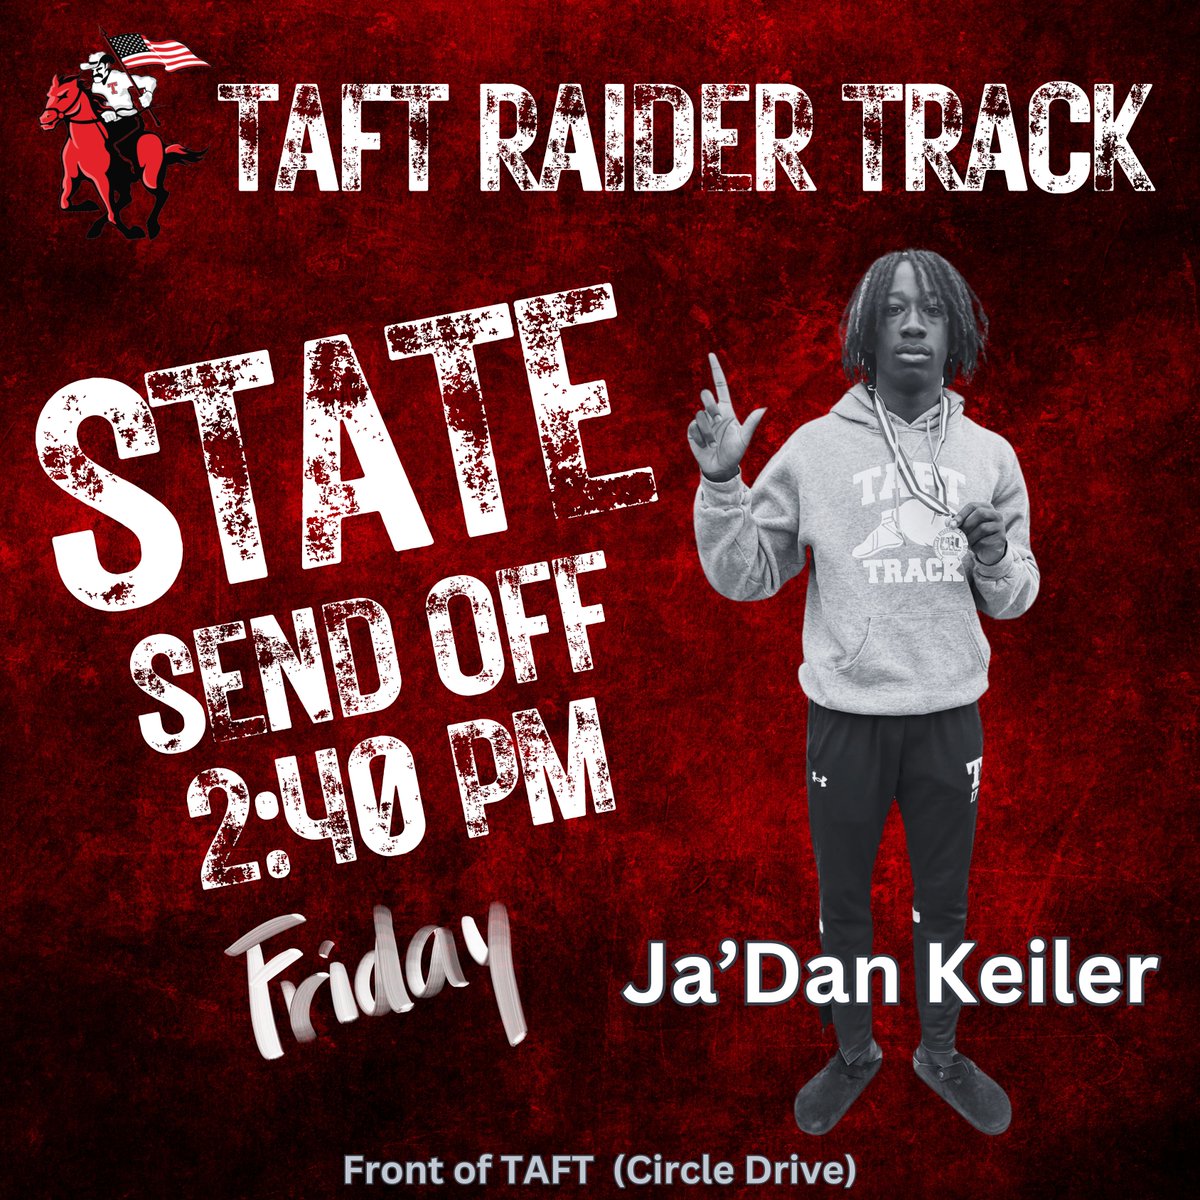 BE THERE!!! Let's Go Ja'Dan!!! We are proud of you!!! #statebound #raiderpride